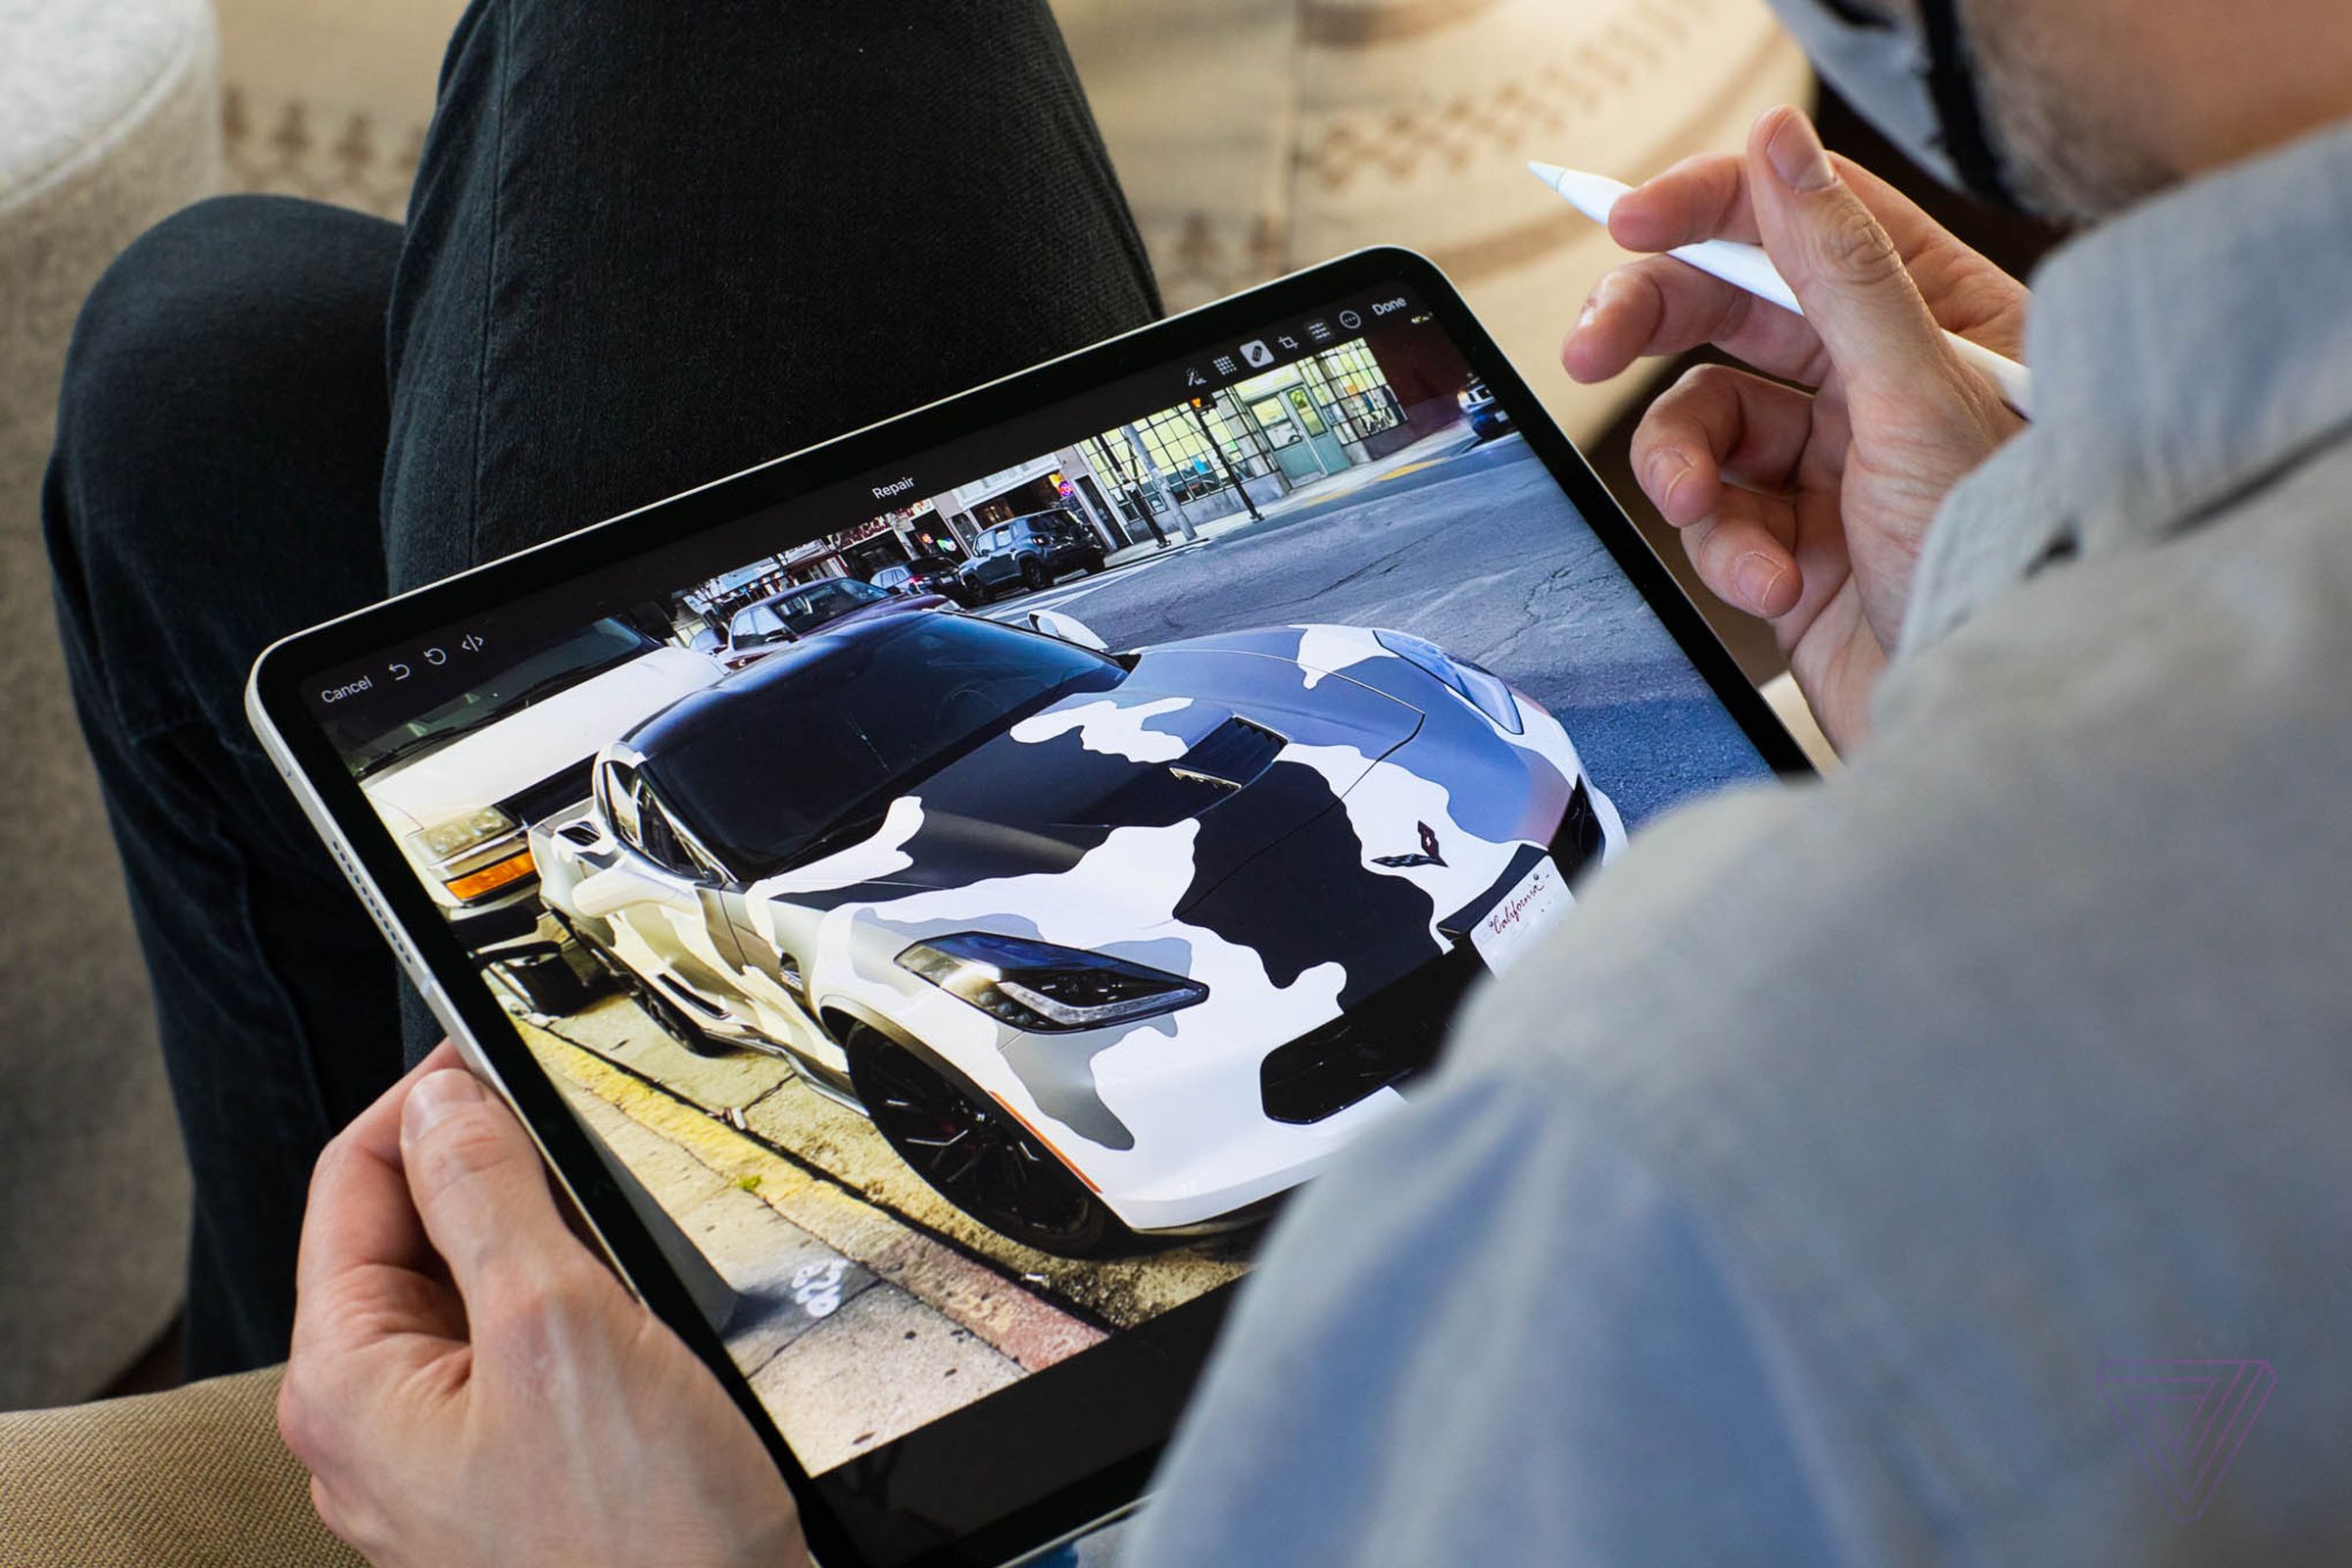 The iPad Pro on a person’s lap while they use an Apple Pencil to edit a photo on the tablet.